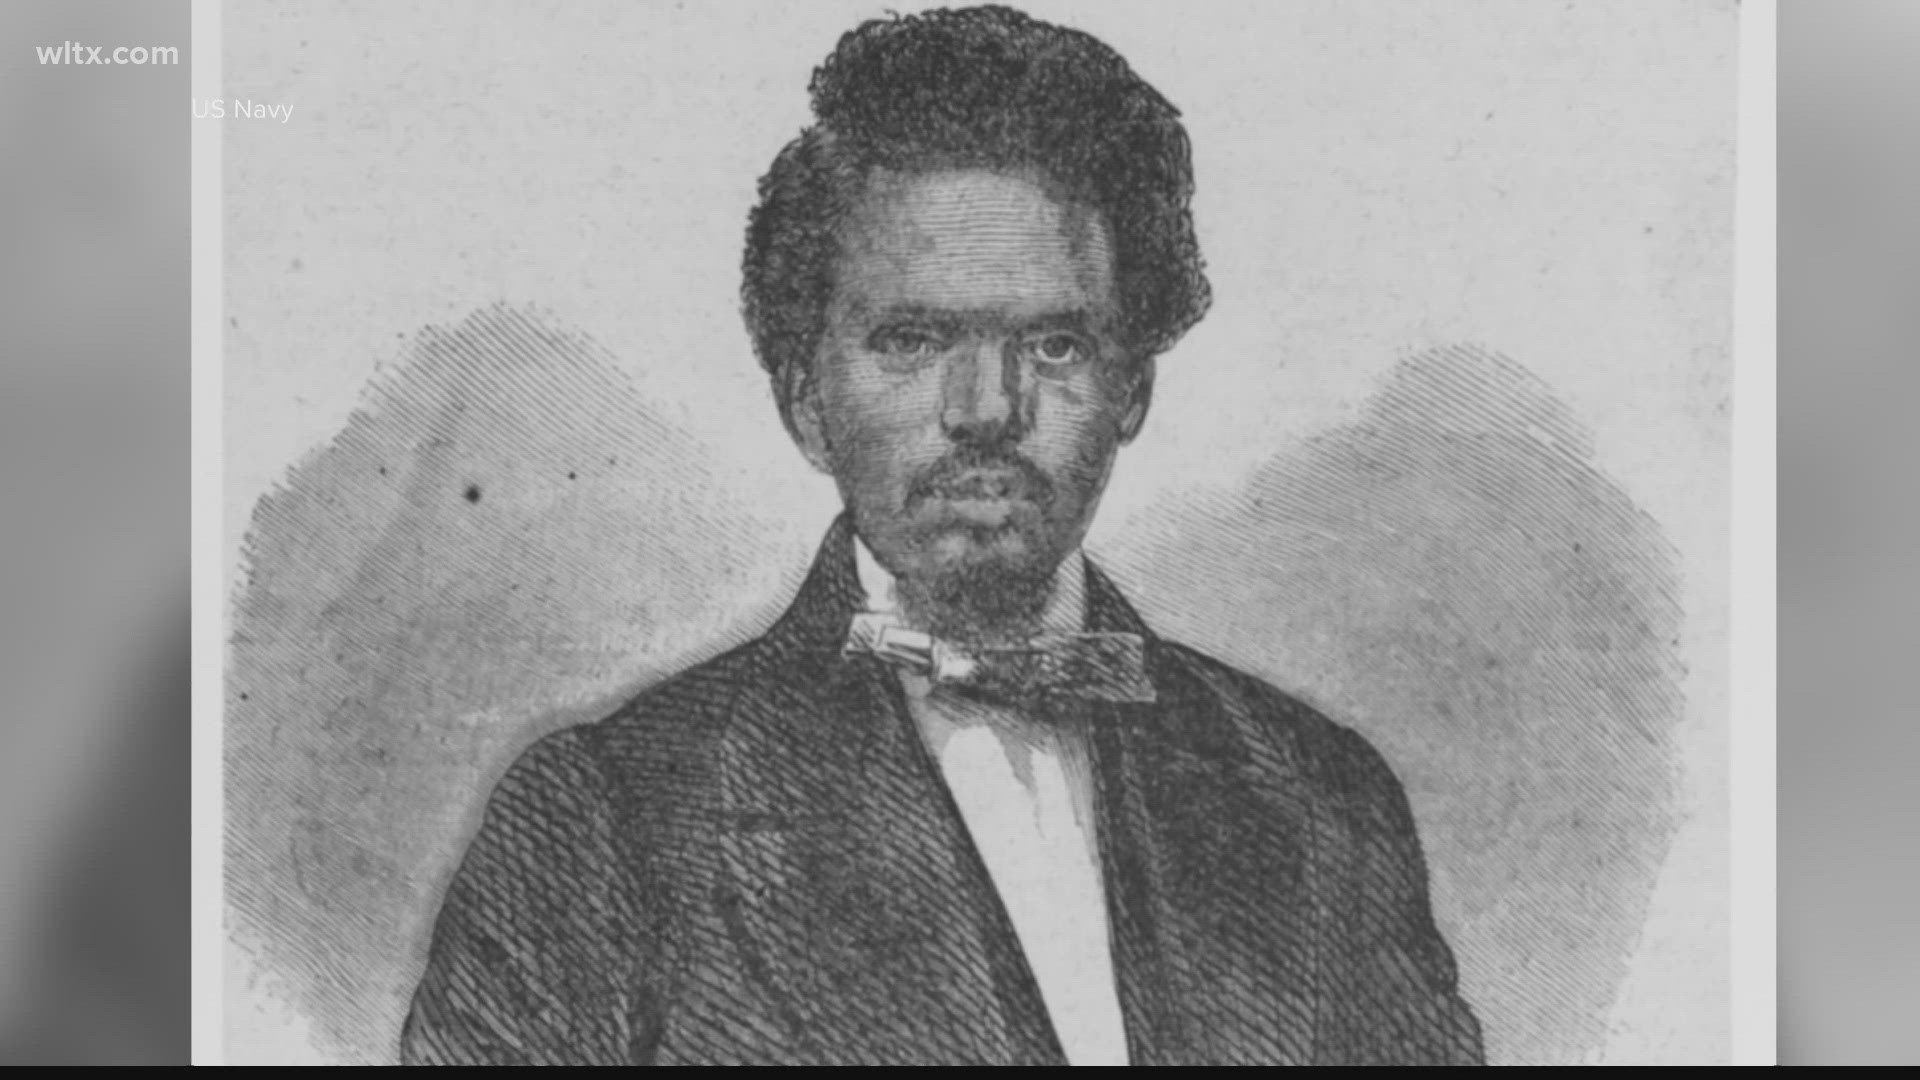 Robert Smalls will be immortalized with a statue on the State House grounds.